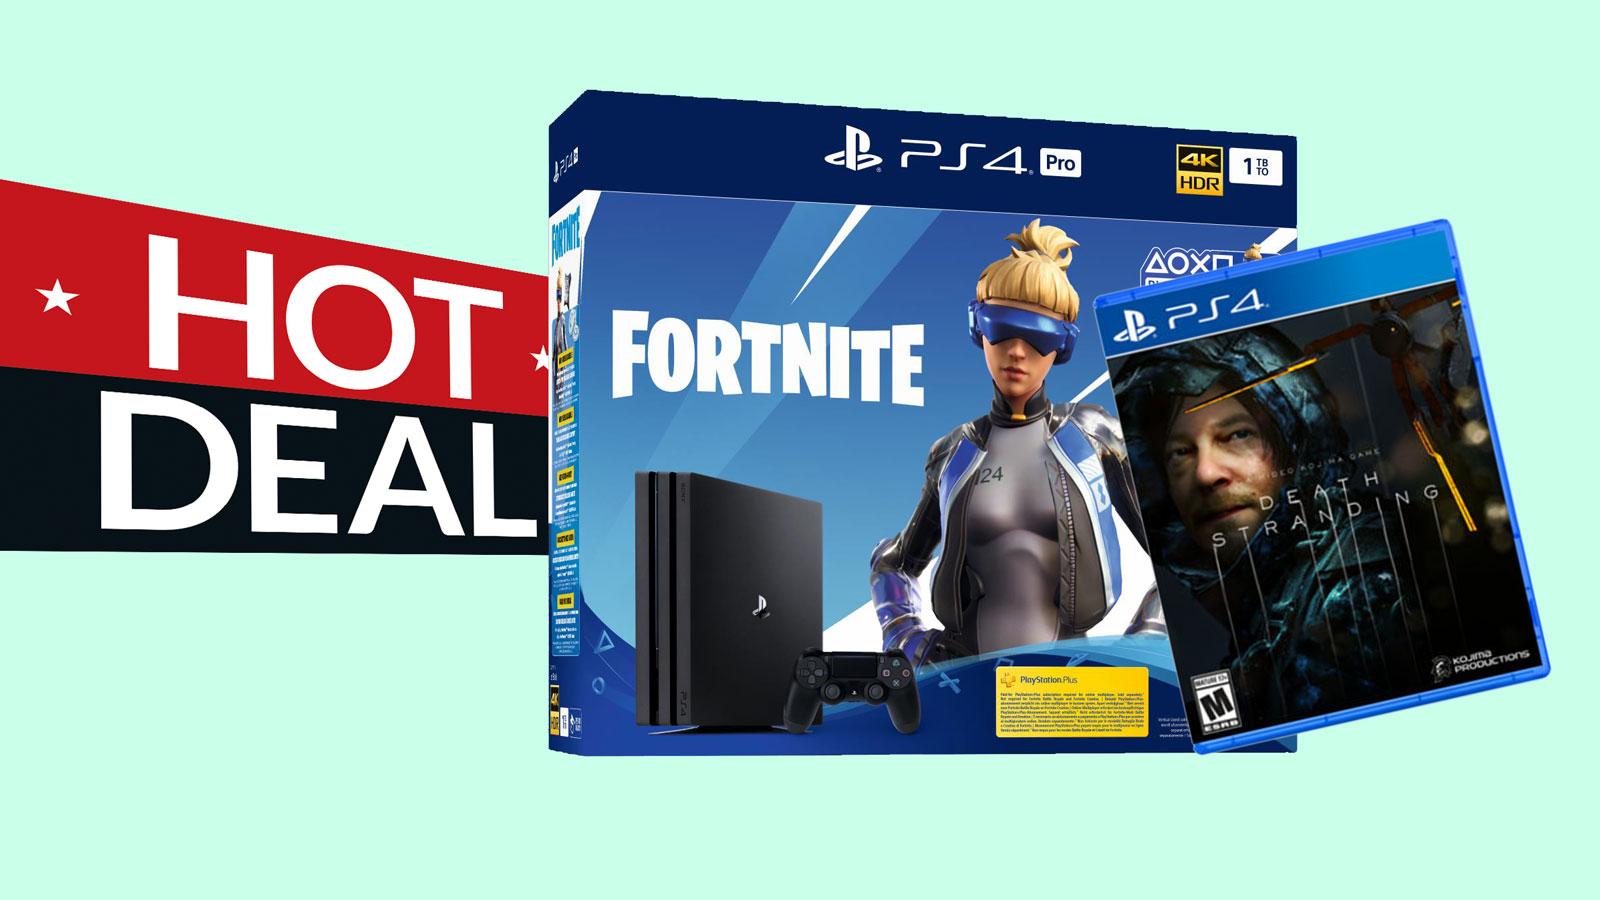 Havbrasme Alperne Feed på PS4 Pro bundle with Fortnite and Death Stranding at rock-bottom price in  Curry's January sales | T3